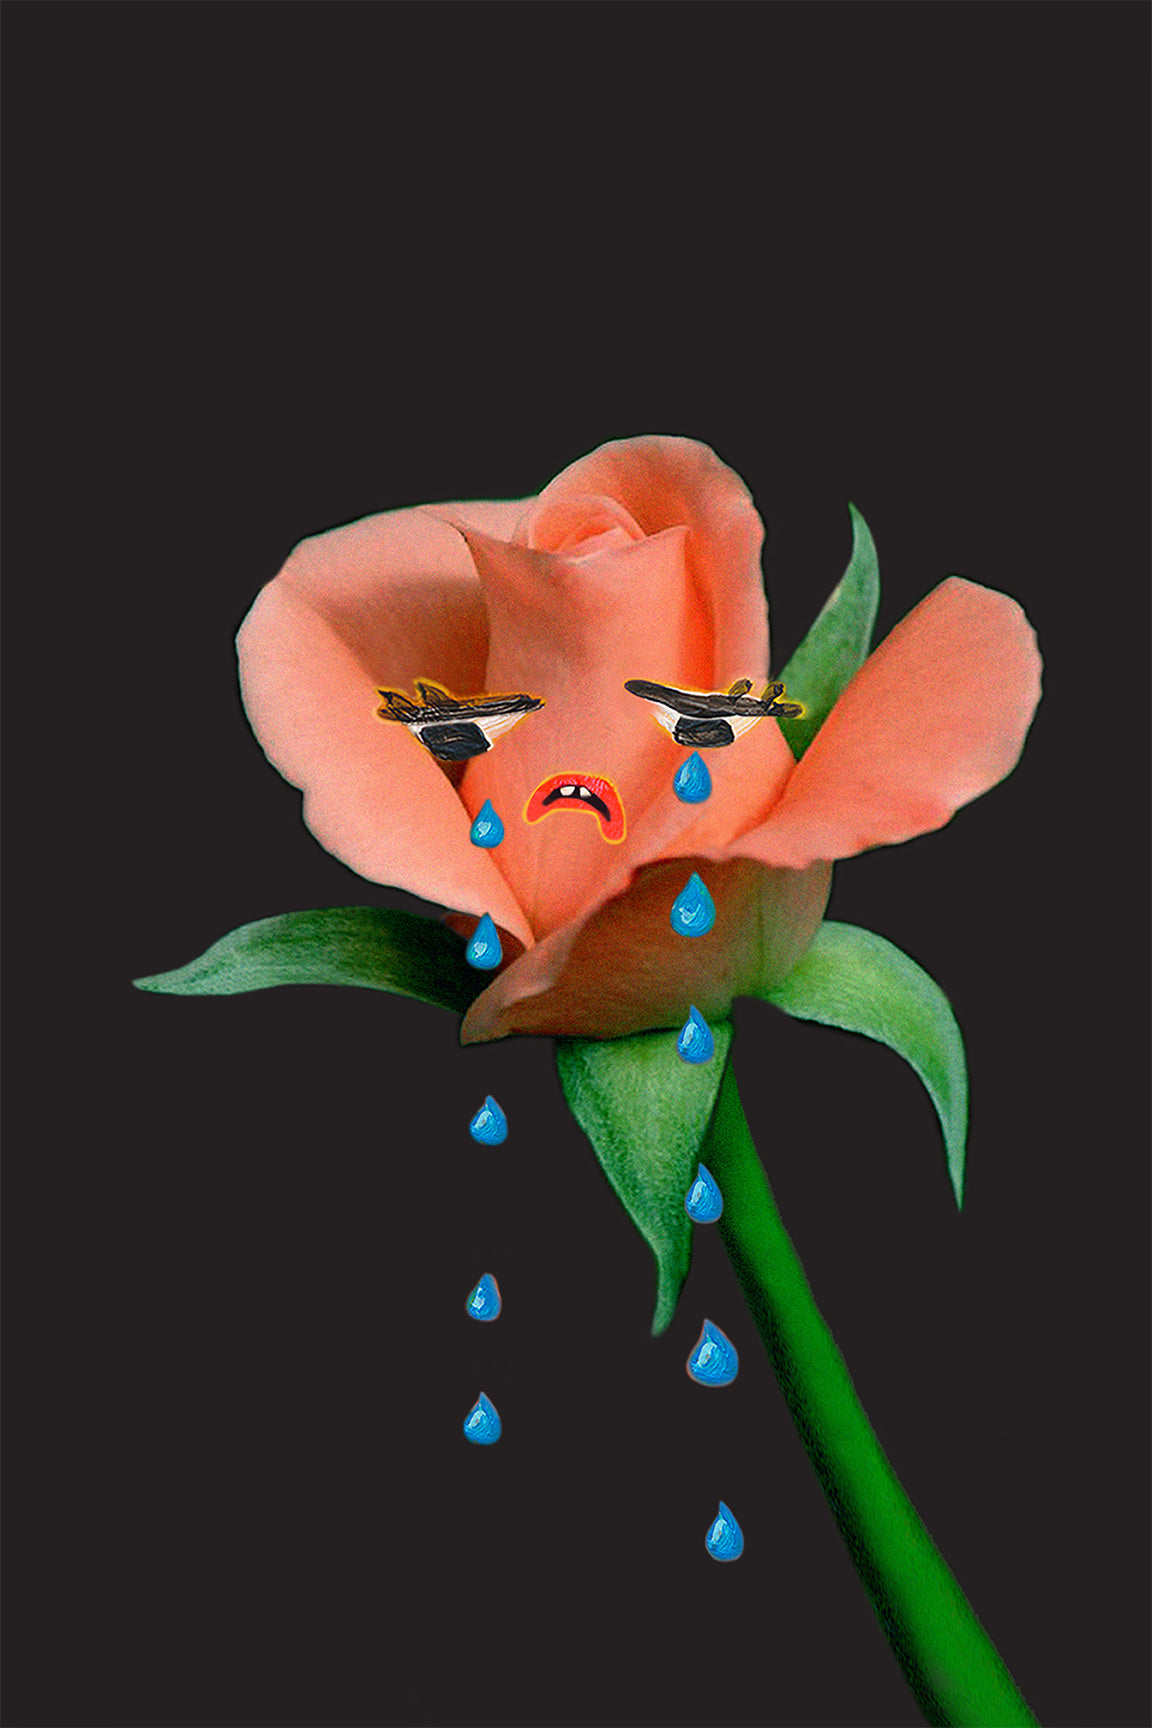 The Weeping Rose